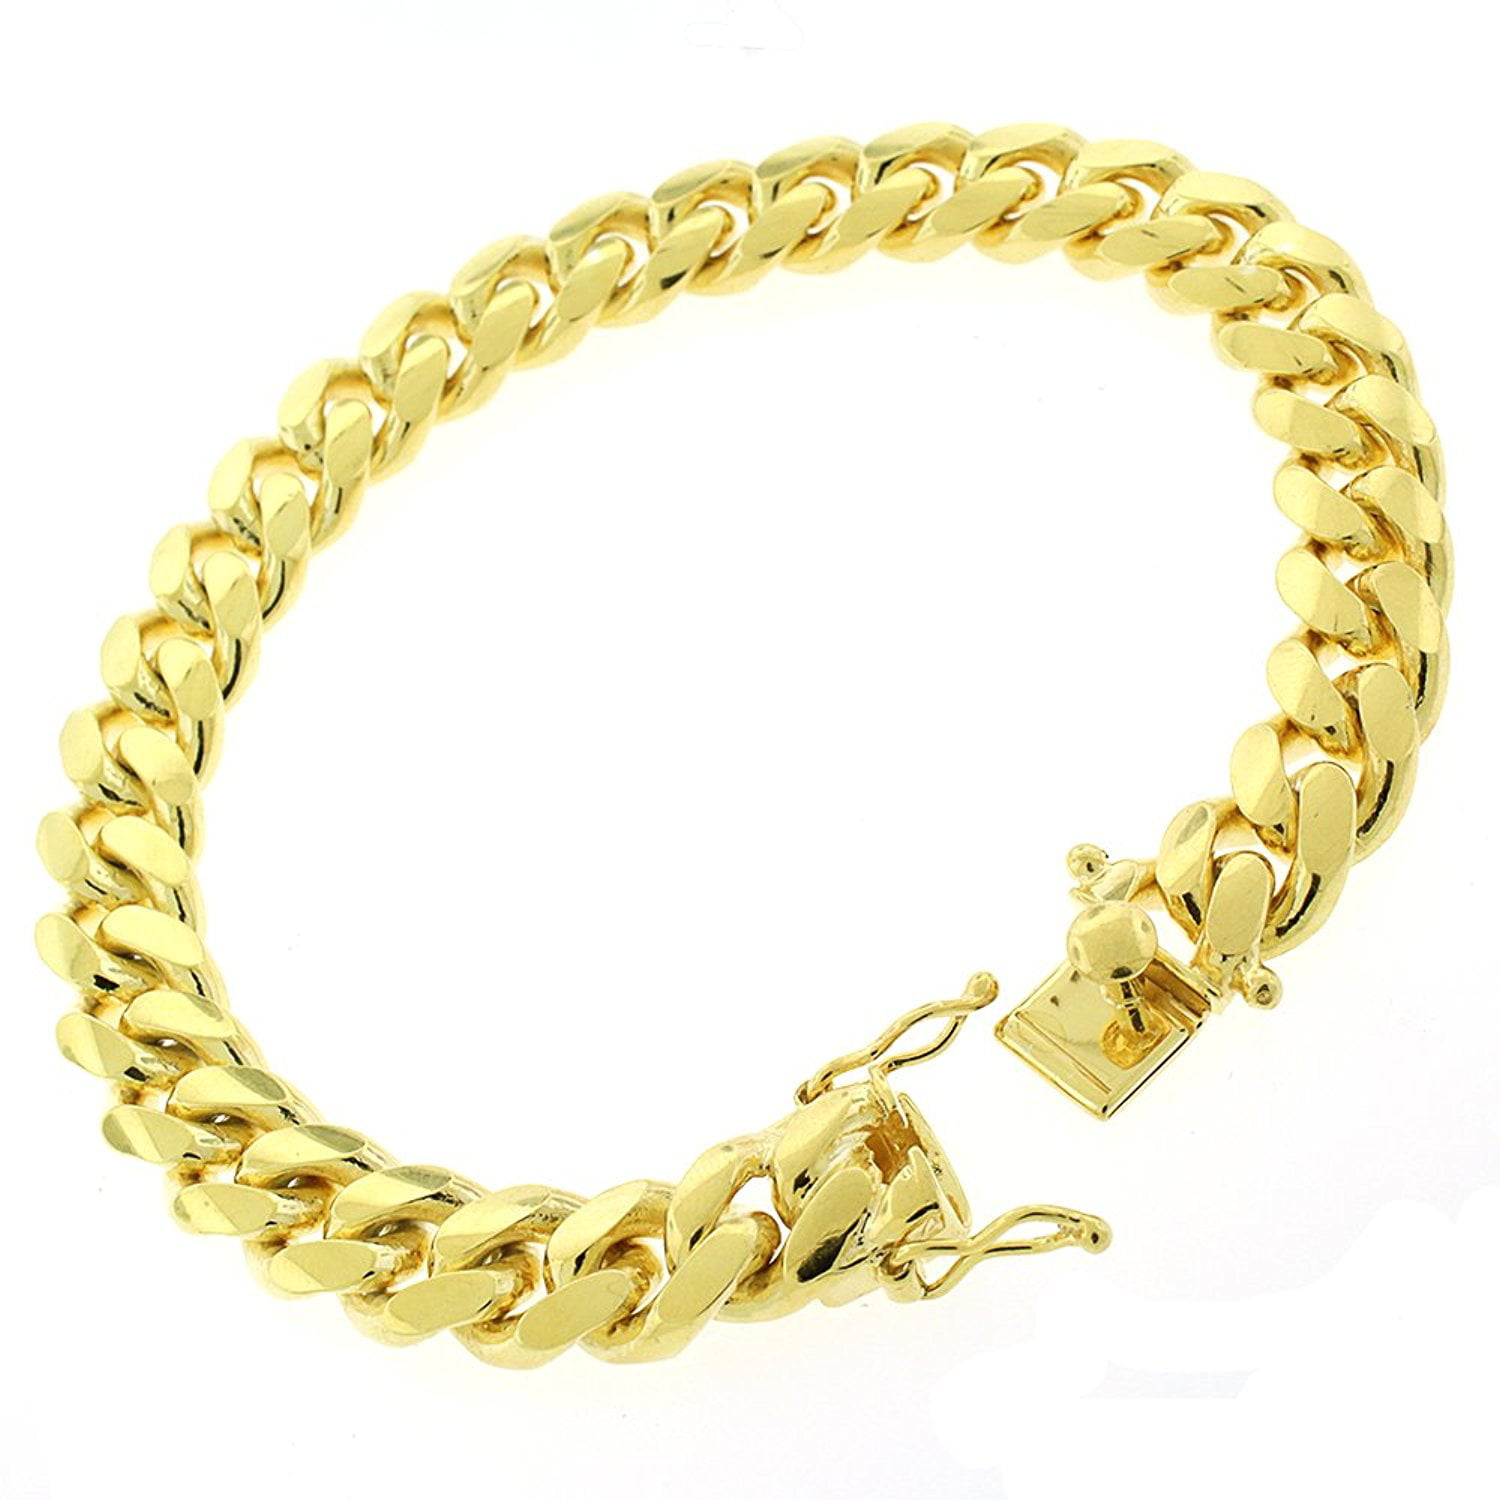 Details about   8-10'' Long Solid 18K Gold Plated 9mm-21mm Miami Cuban Curb Link Chain Bracelet 